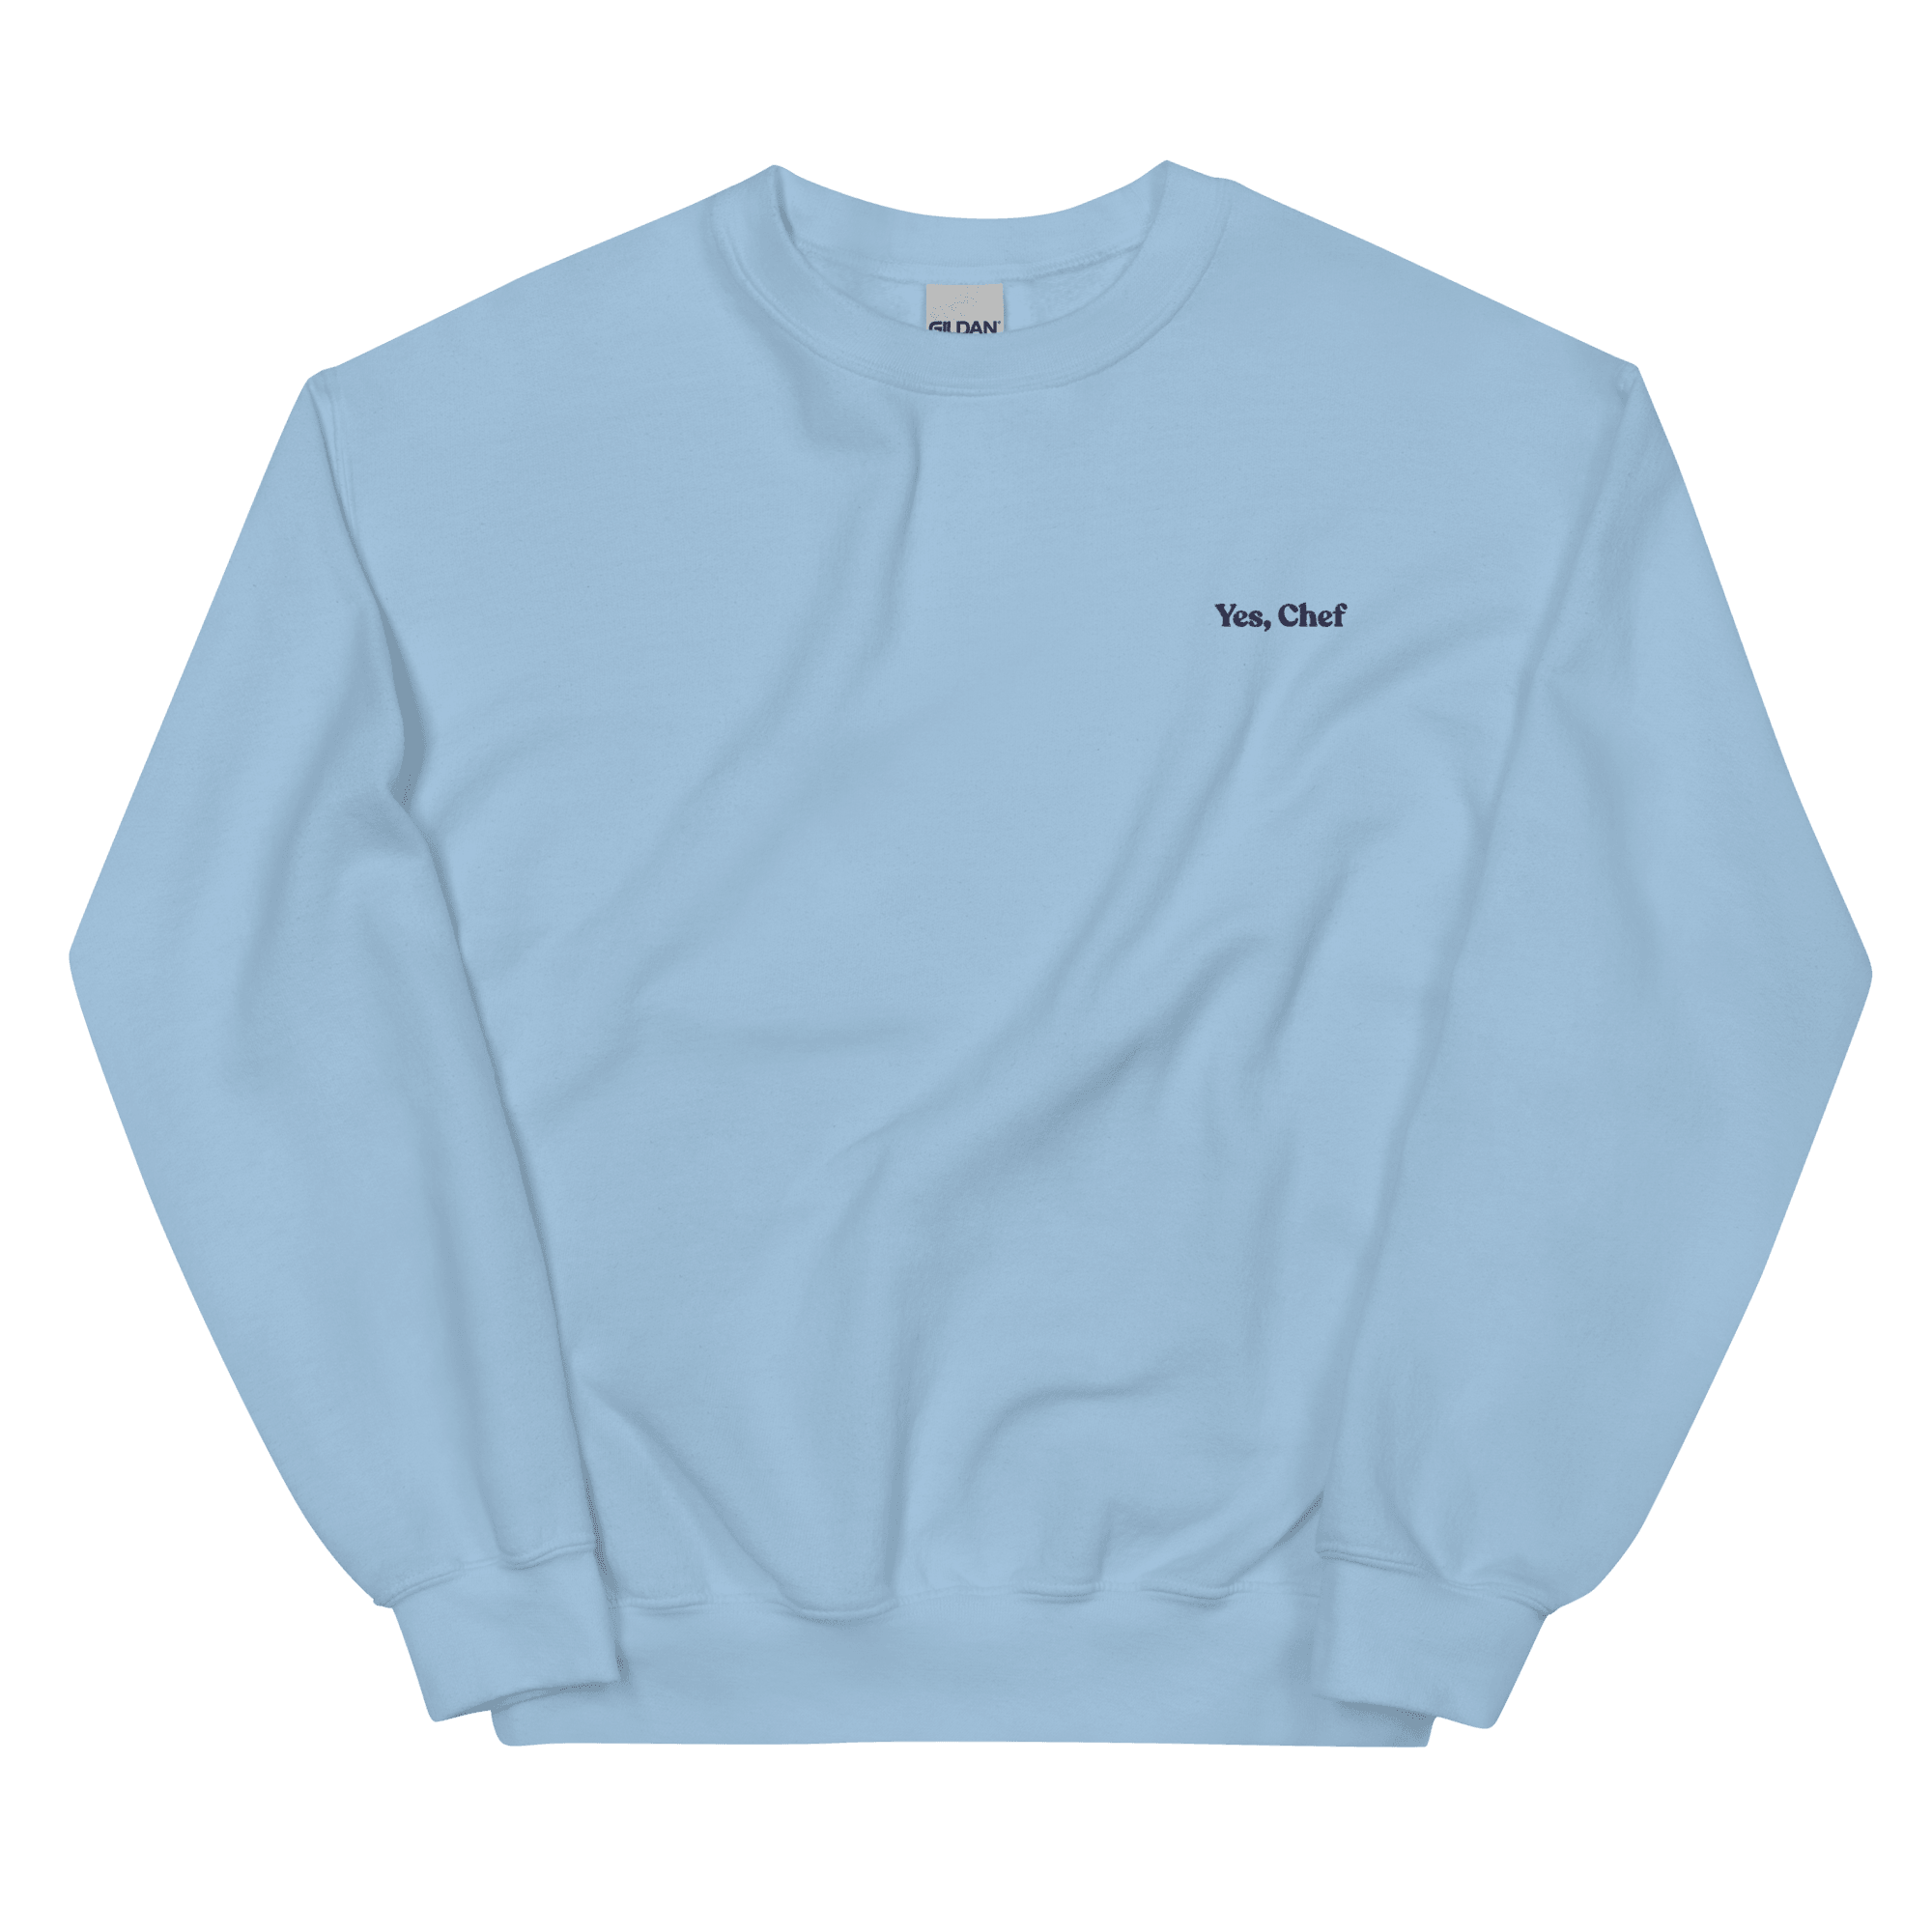 Yes, Chef Embroidered Sweatshirt - Polychrome Goods 🍊